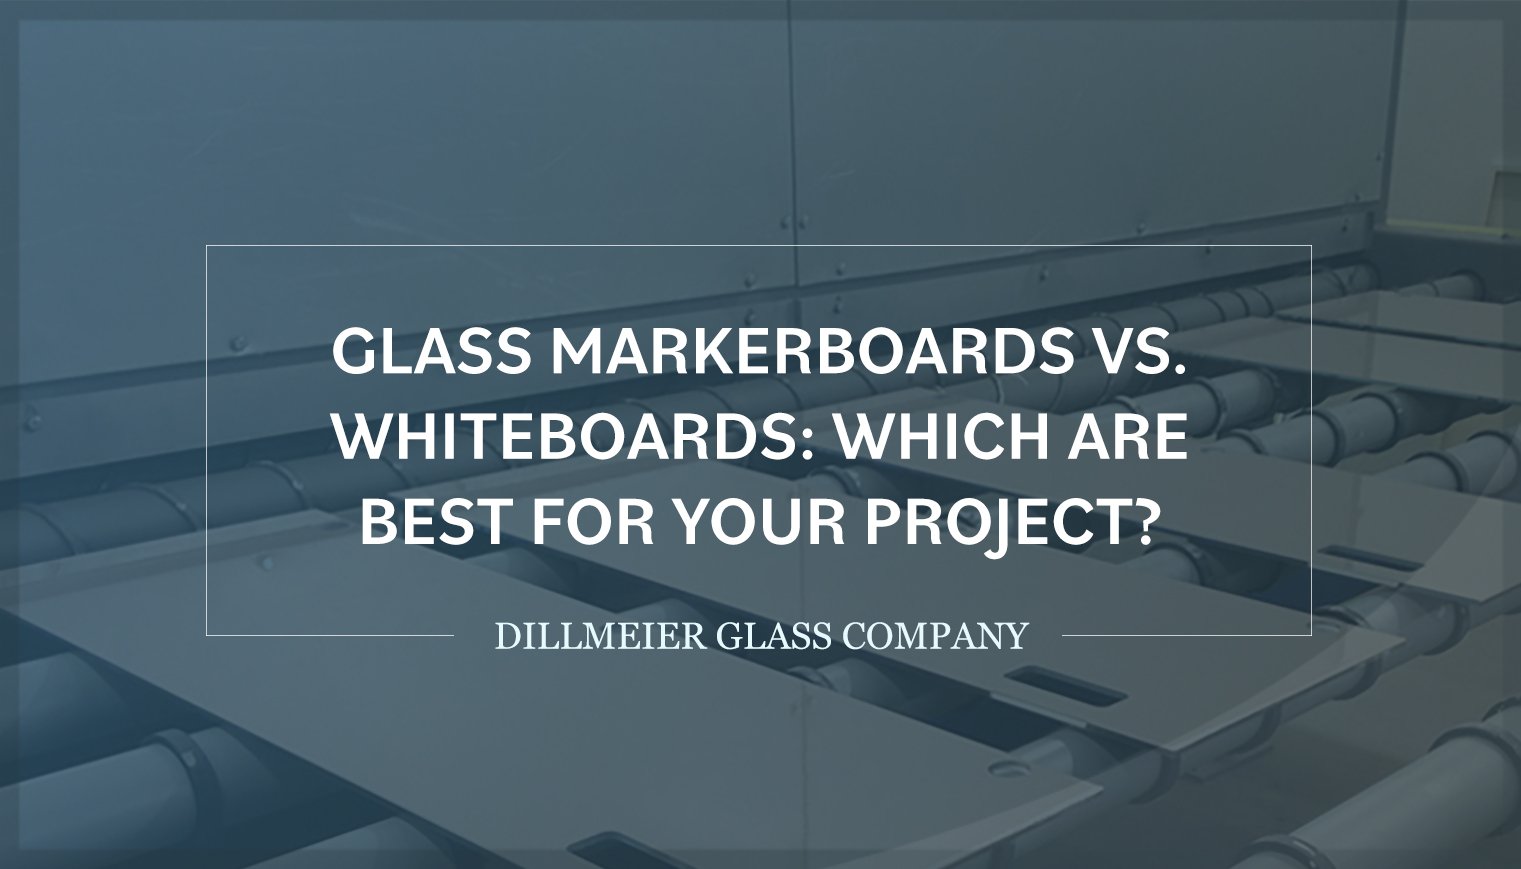 Glass Markerboards vs. Whiteboards: Which Are Best for Your Project?